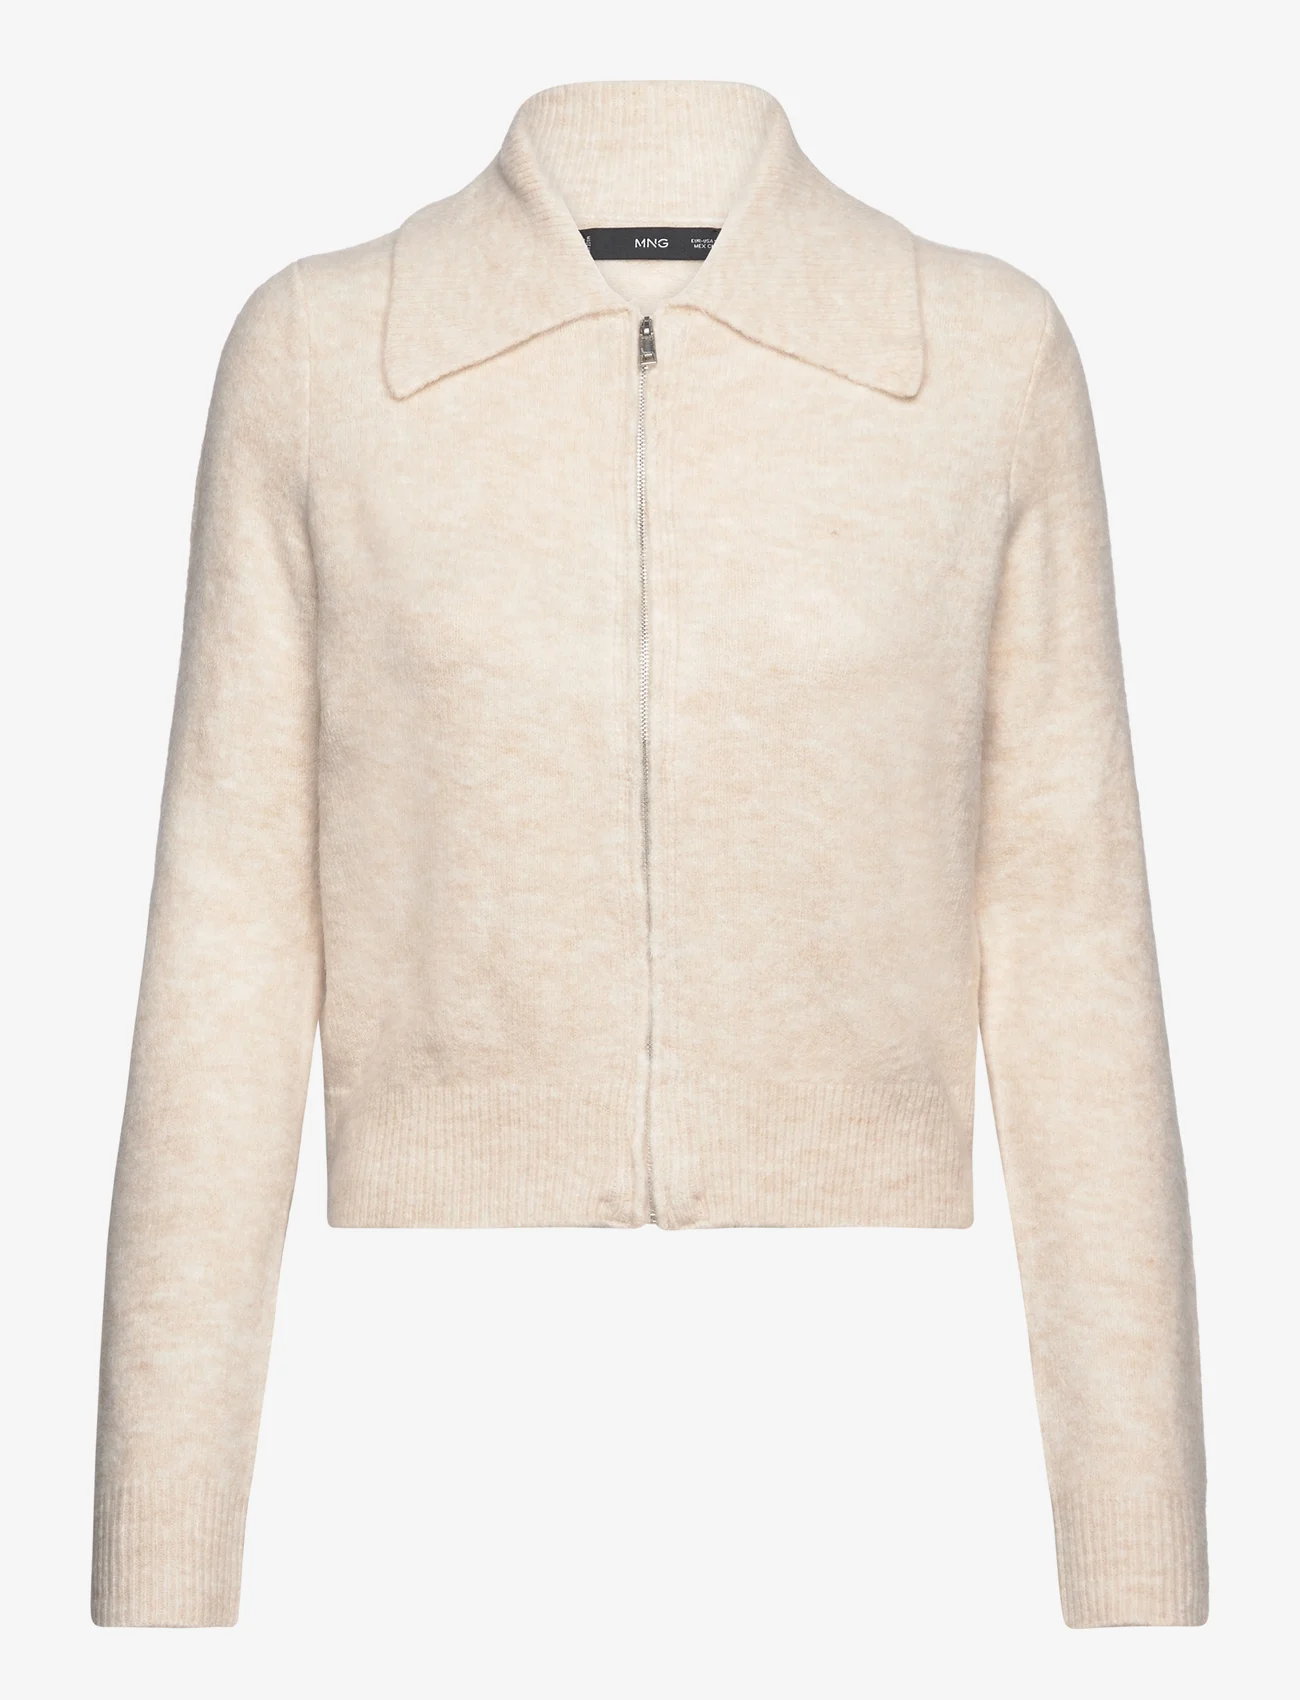 Mango - Knitted jacket with zip - cardigans - light beige - 0